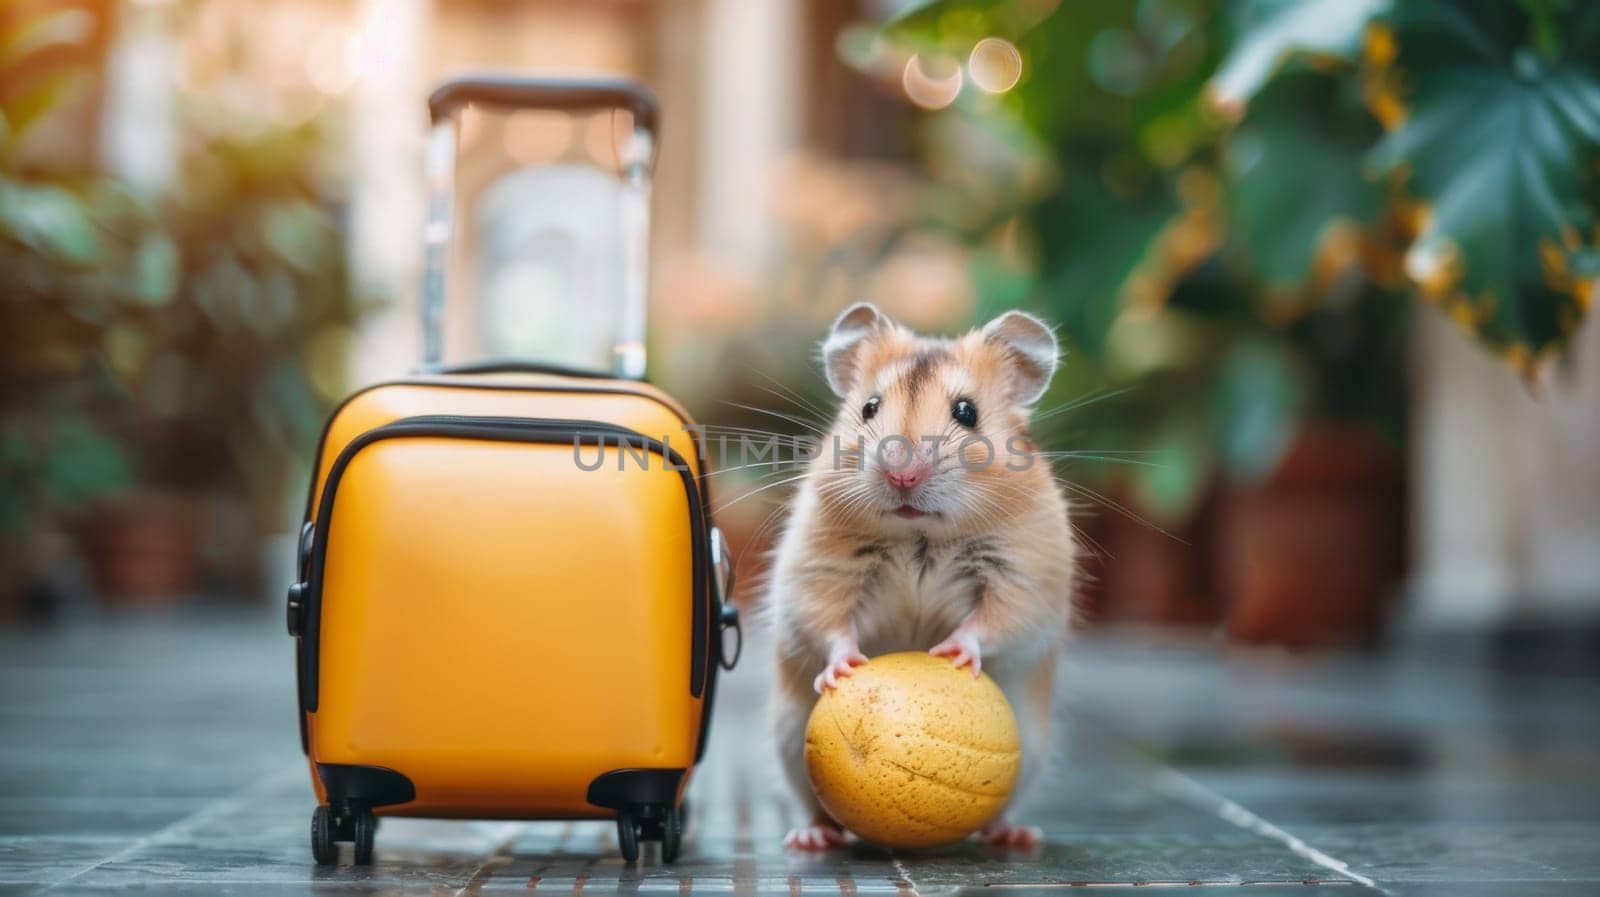 A hamster with yellow ball next to a suitcase on tile